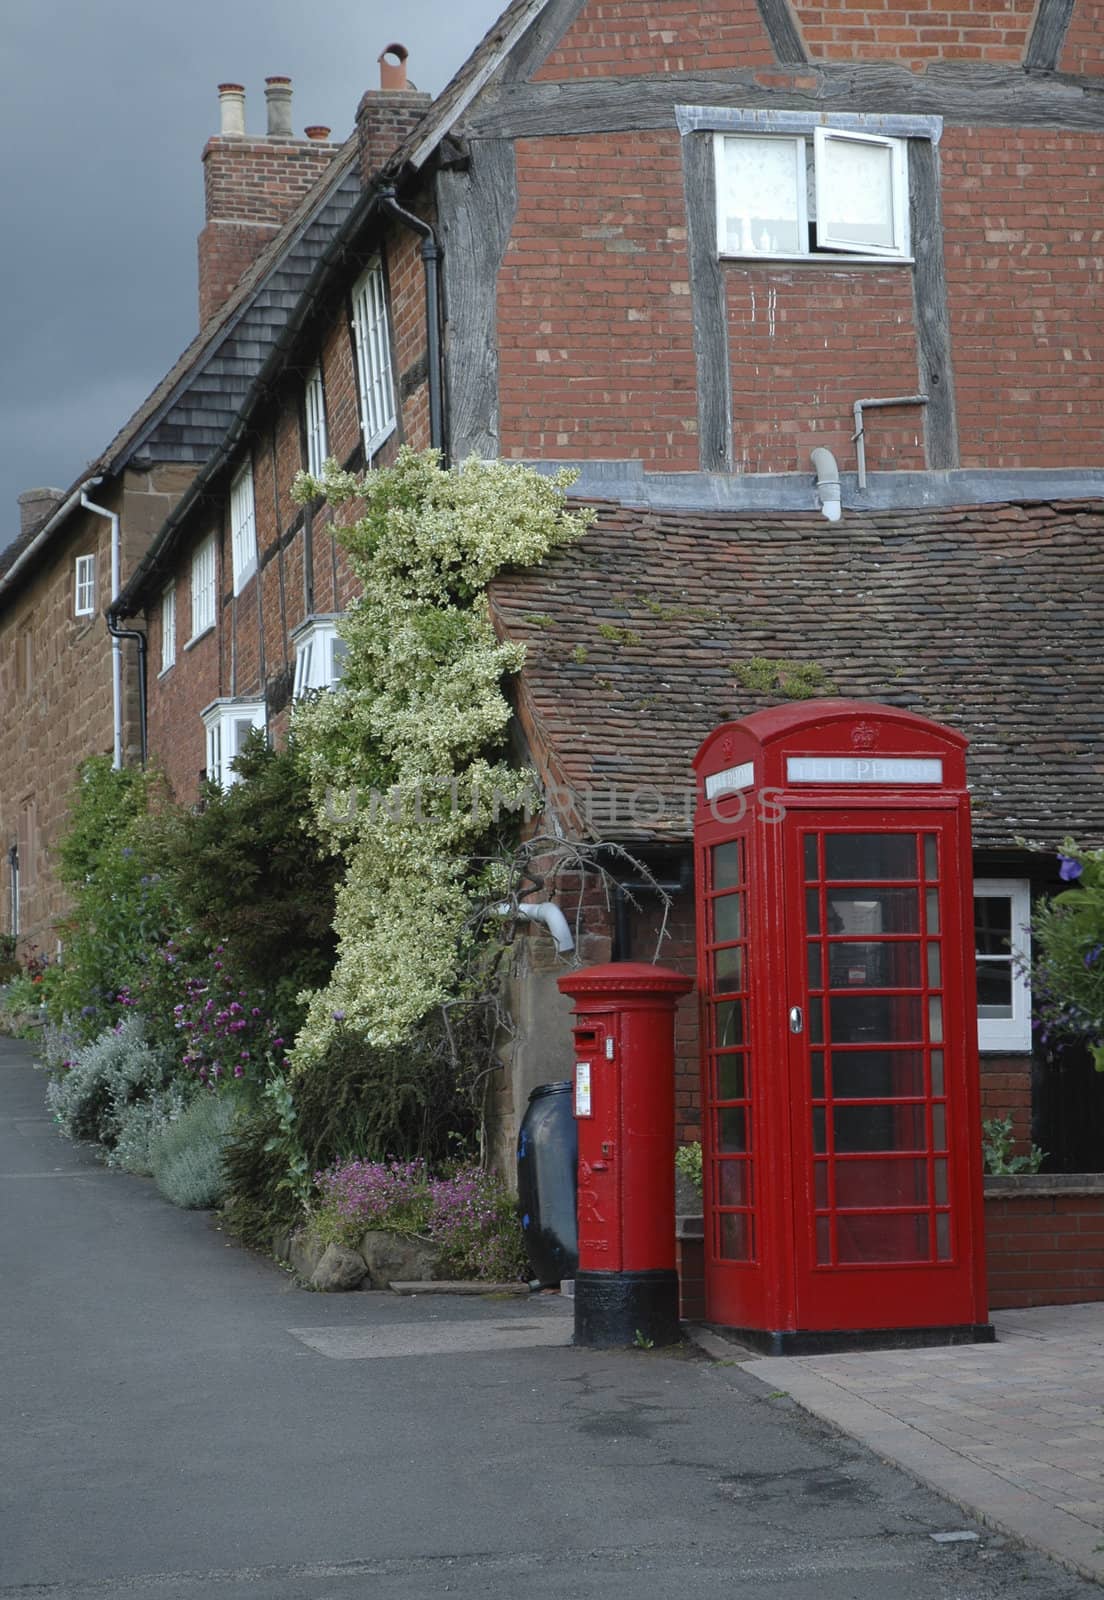 Old village scene with houses, telephone and postbox